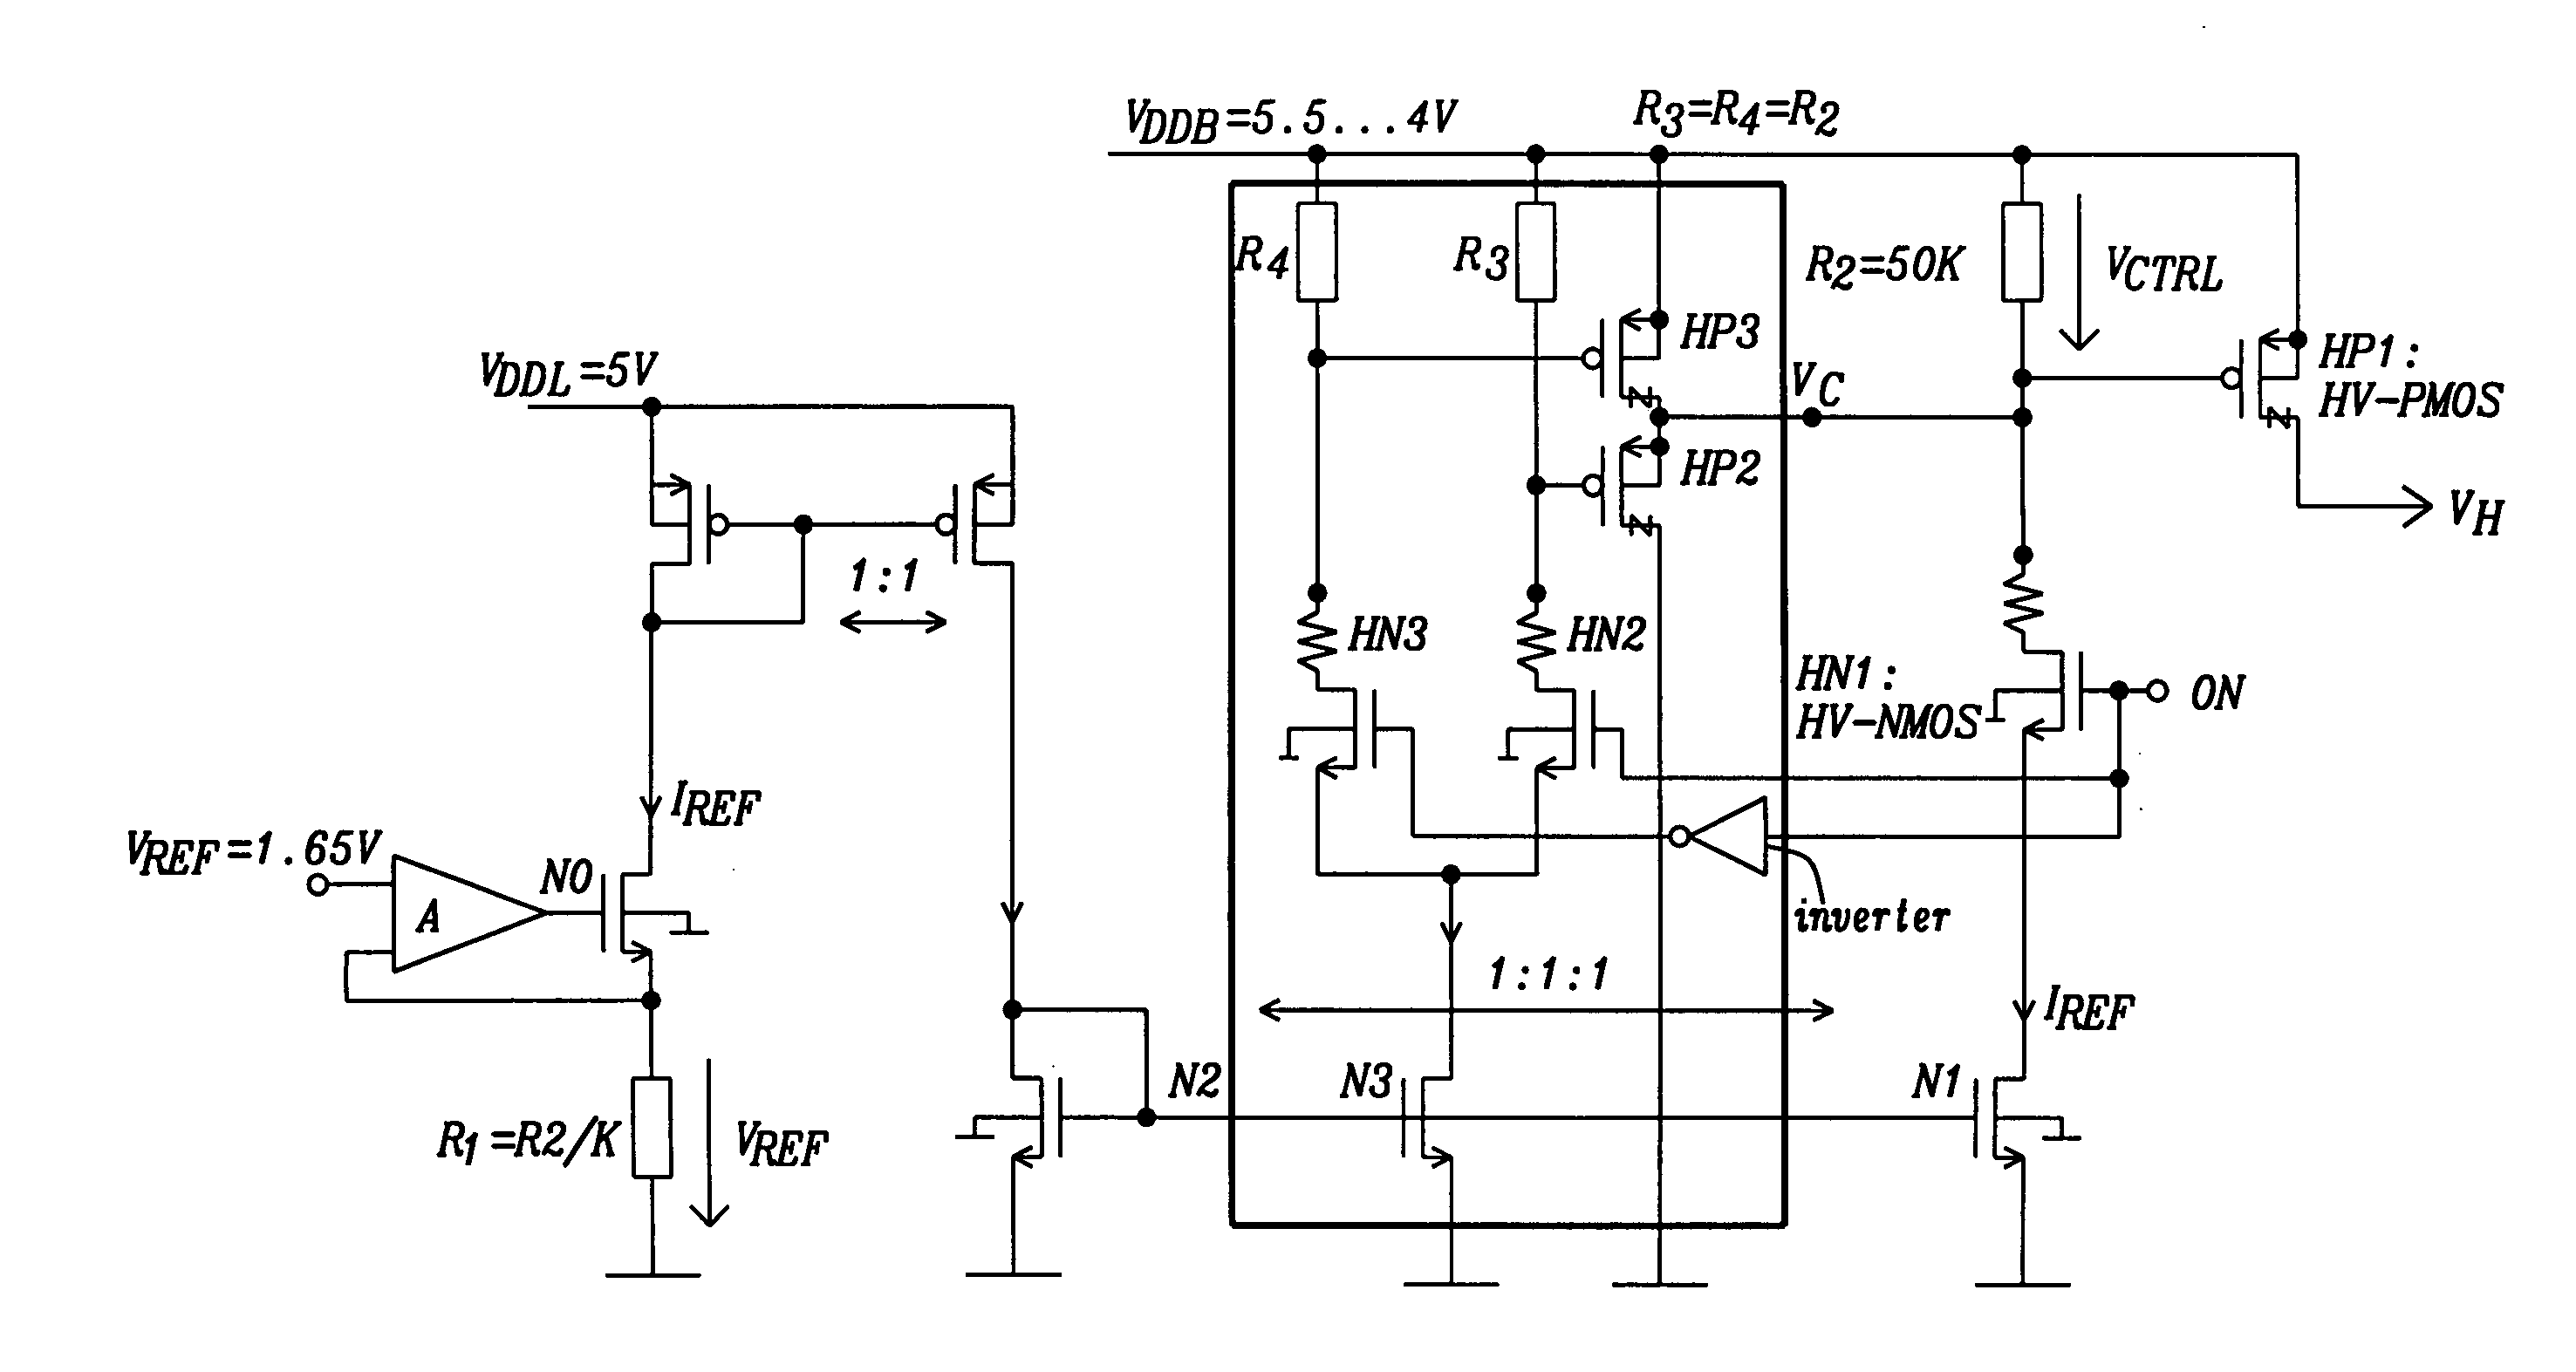 Rapid switchable HV P-MOS power transistor driver with constant gate-source control voltage